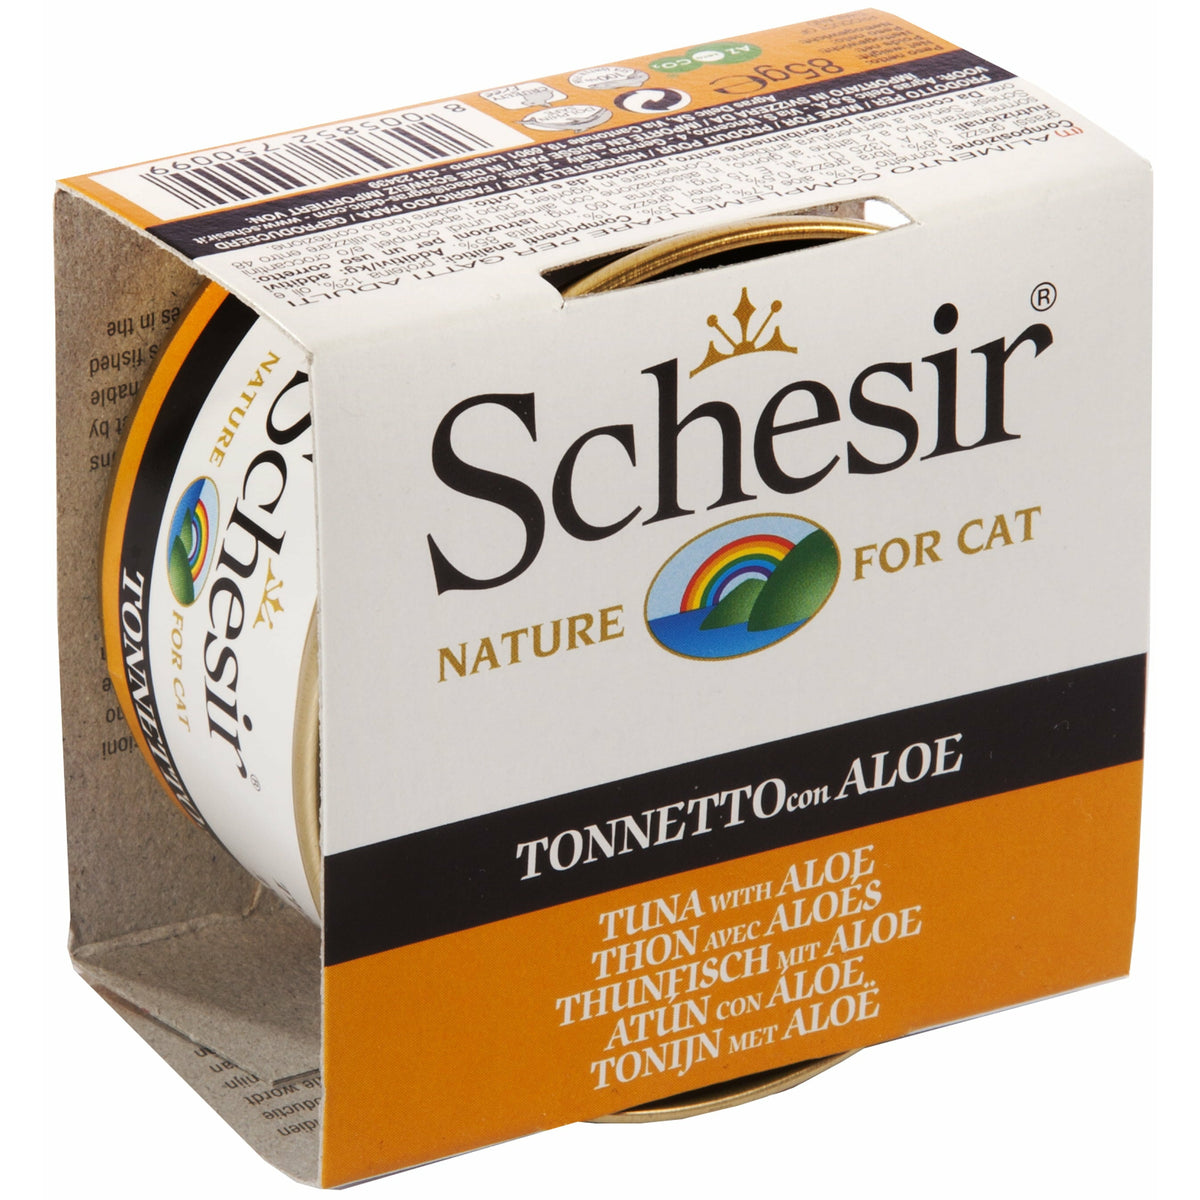 Schesir Tuna with Aloe (85g) - Canned Cat Food